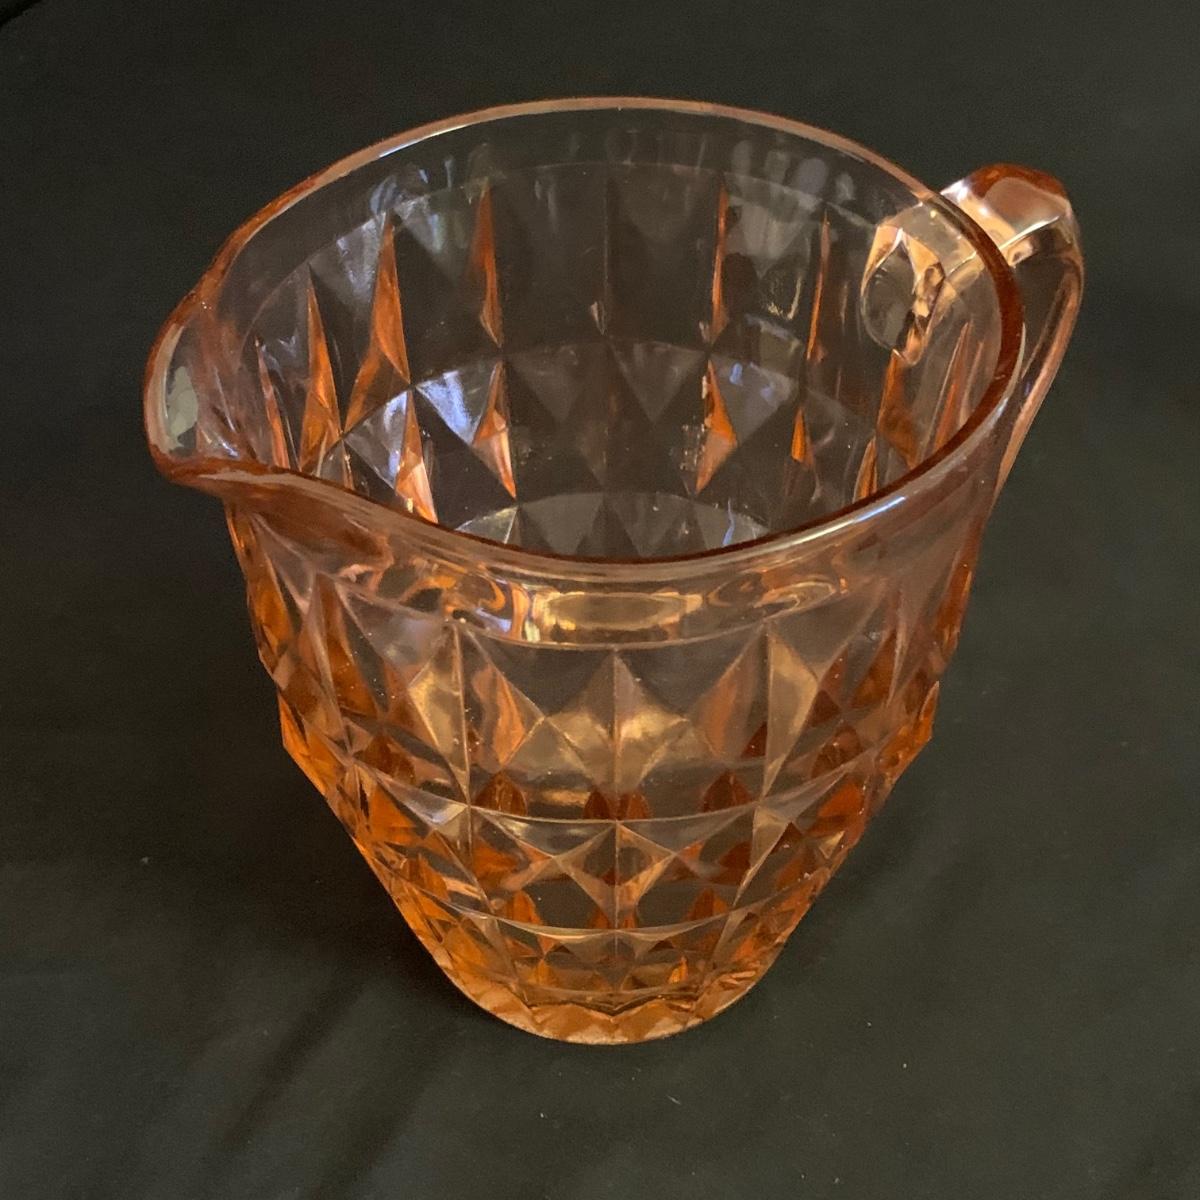 Sold at Auction: Lot of Three Vaseline Glass Nesting Bowls